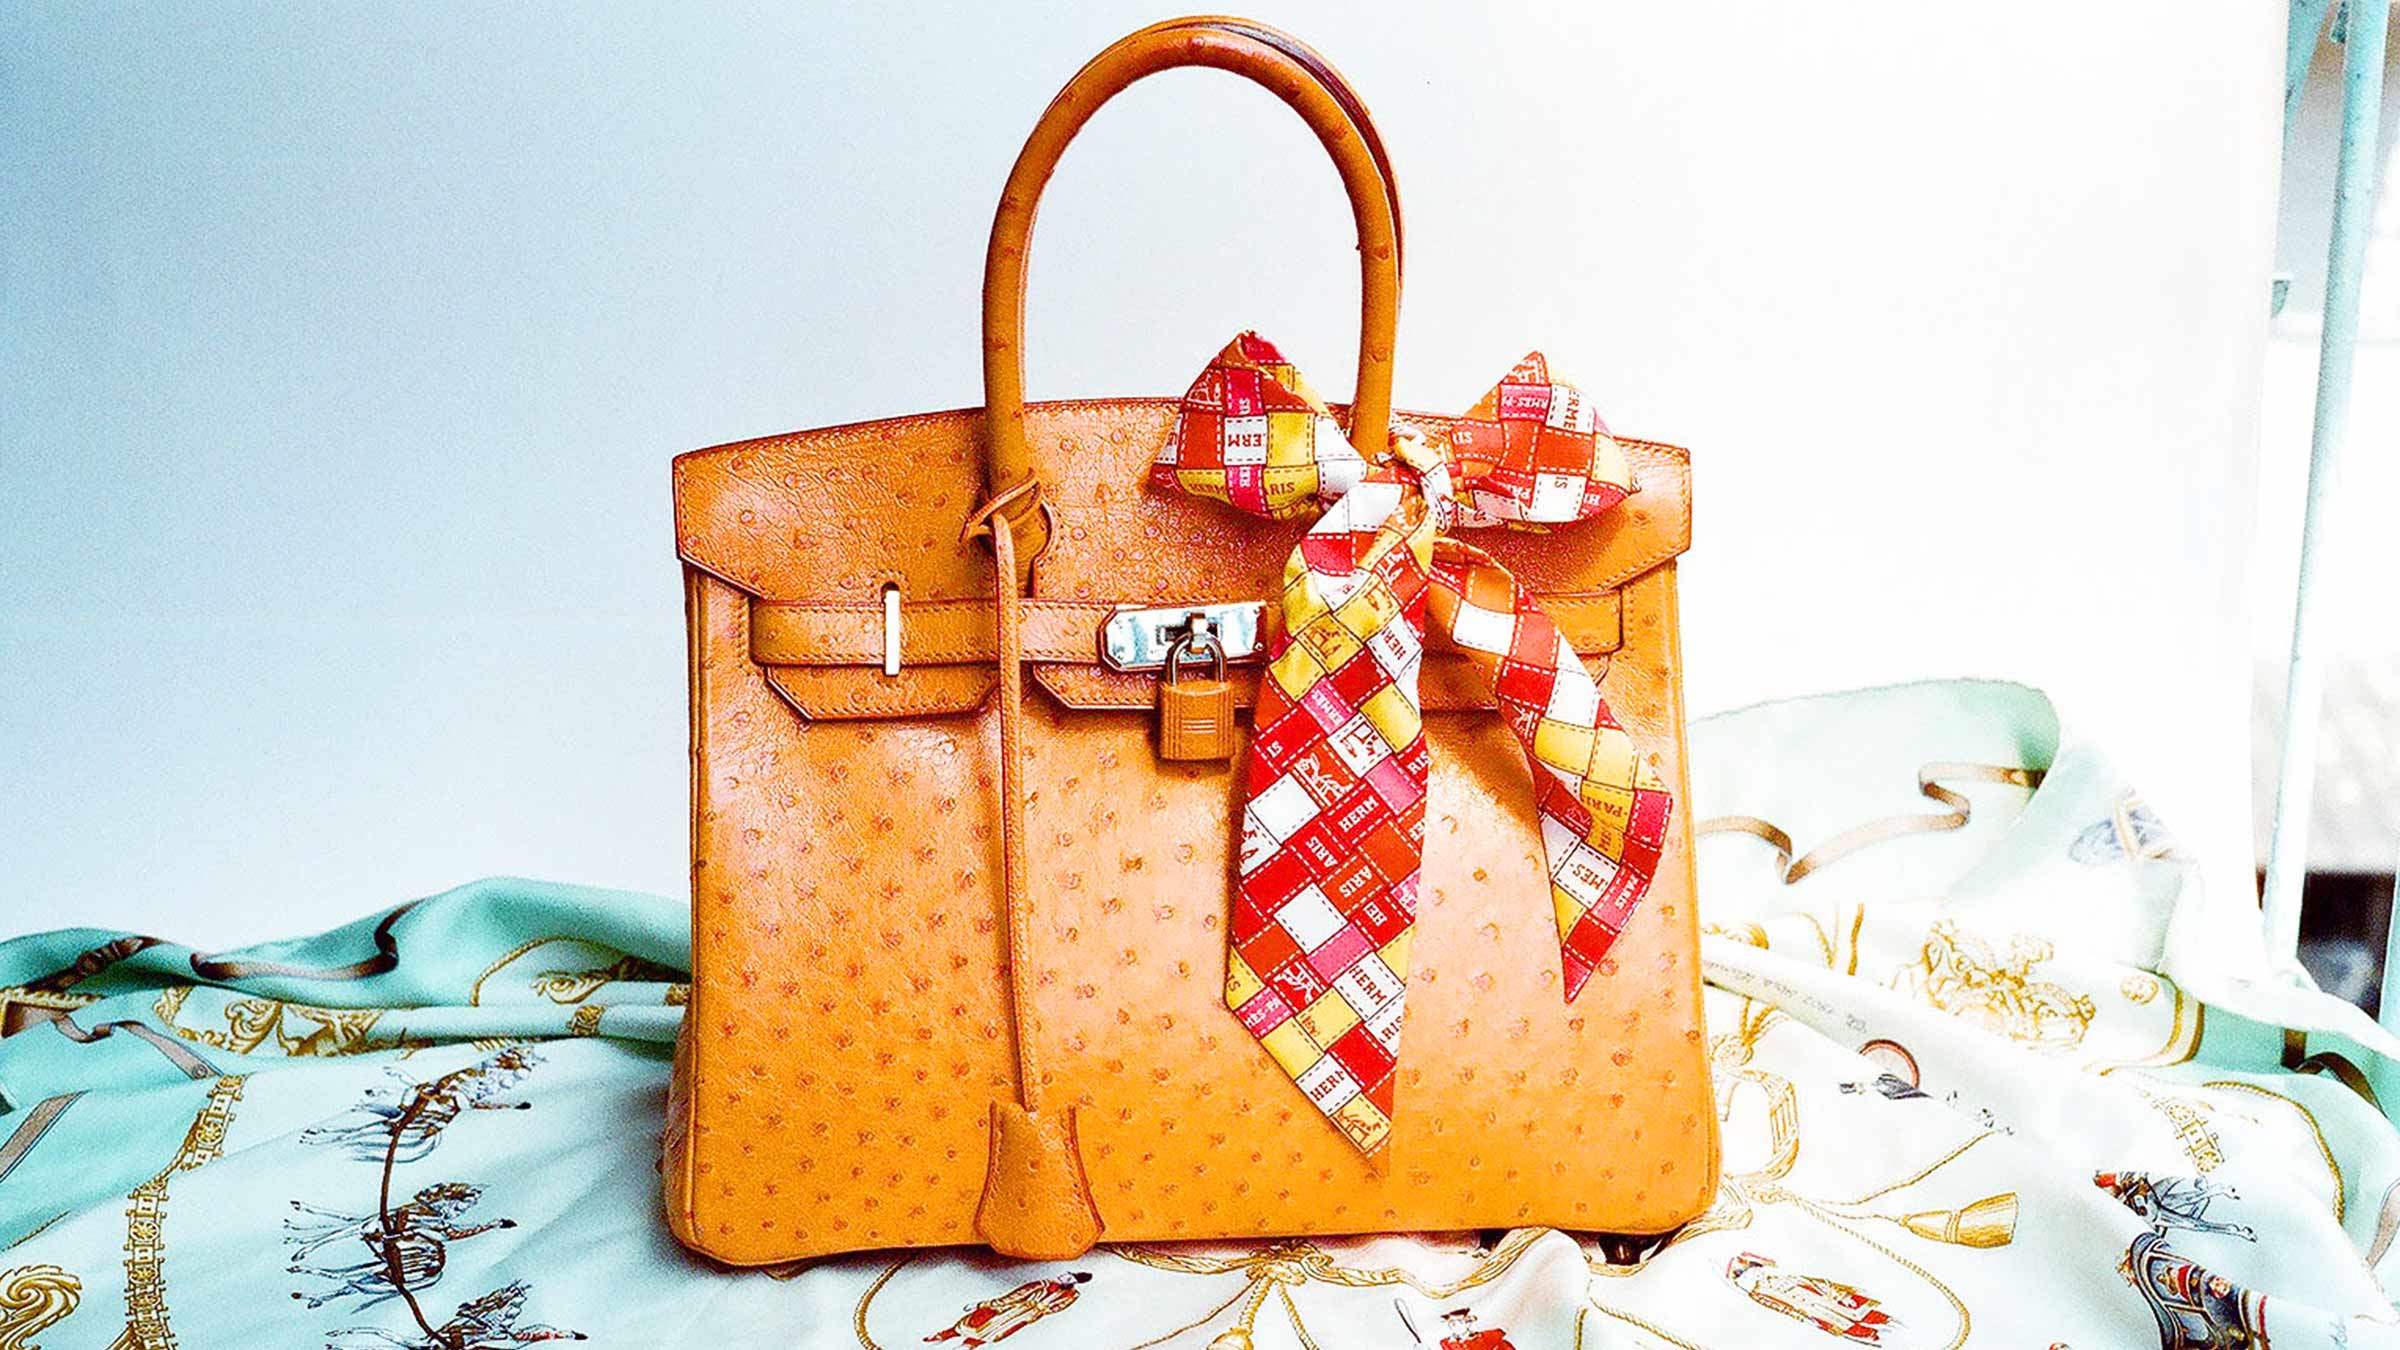 The Jury Is Out: The Hermès Birkin Or The Kelly?